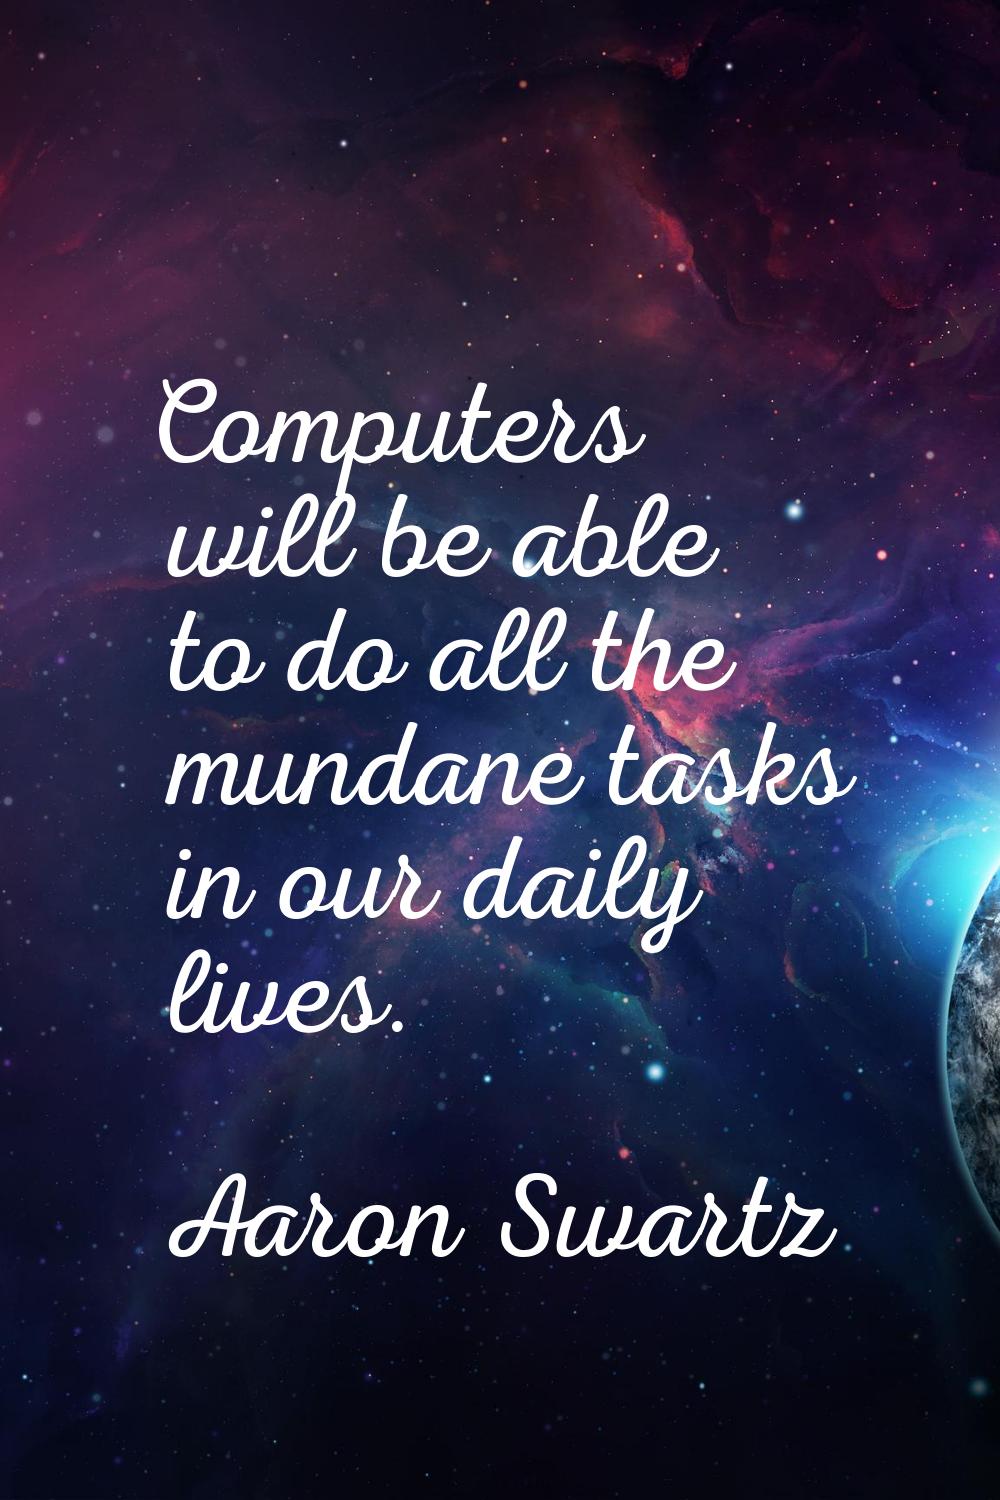 Computers will be able to do all the mundane tasks in our daily lives.